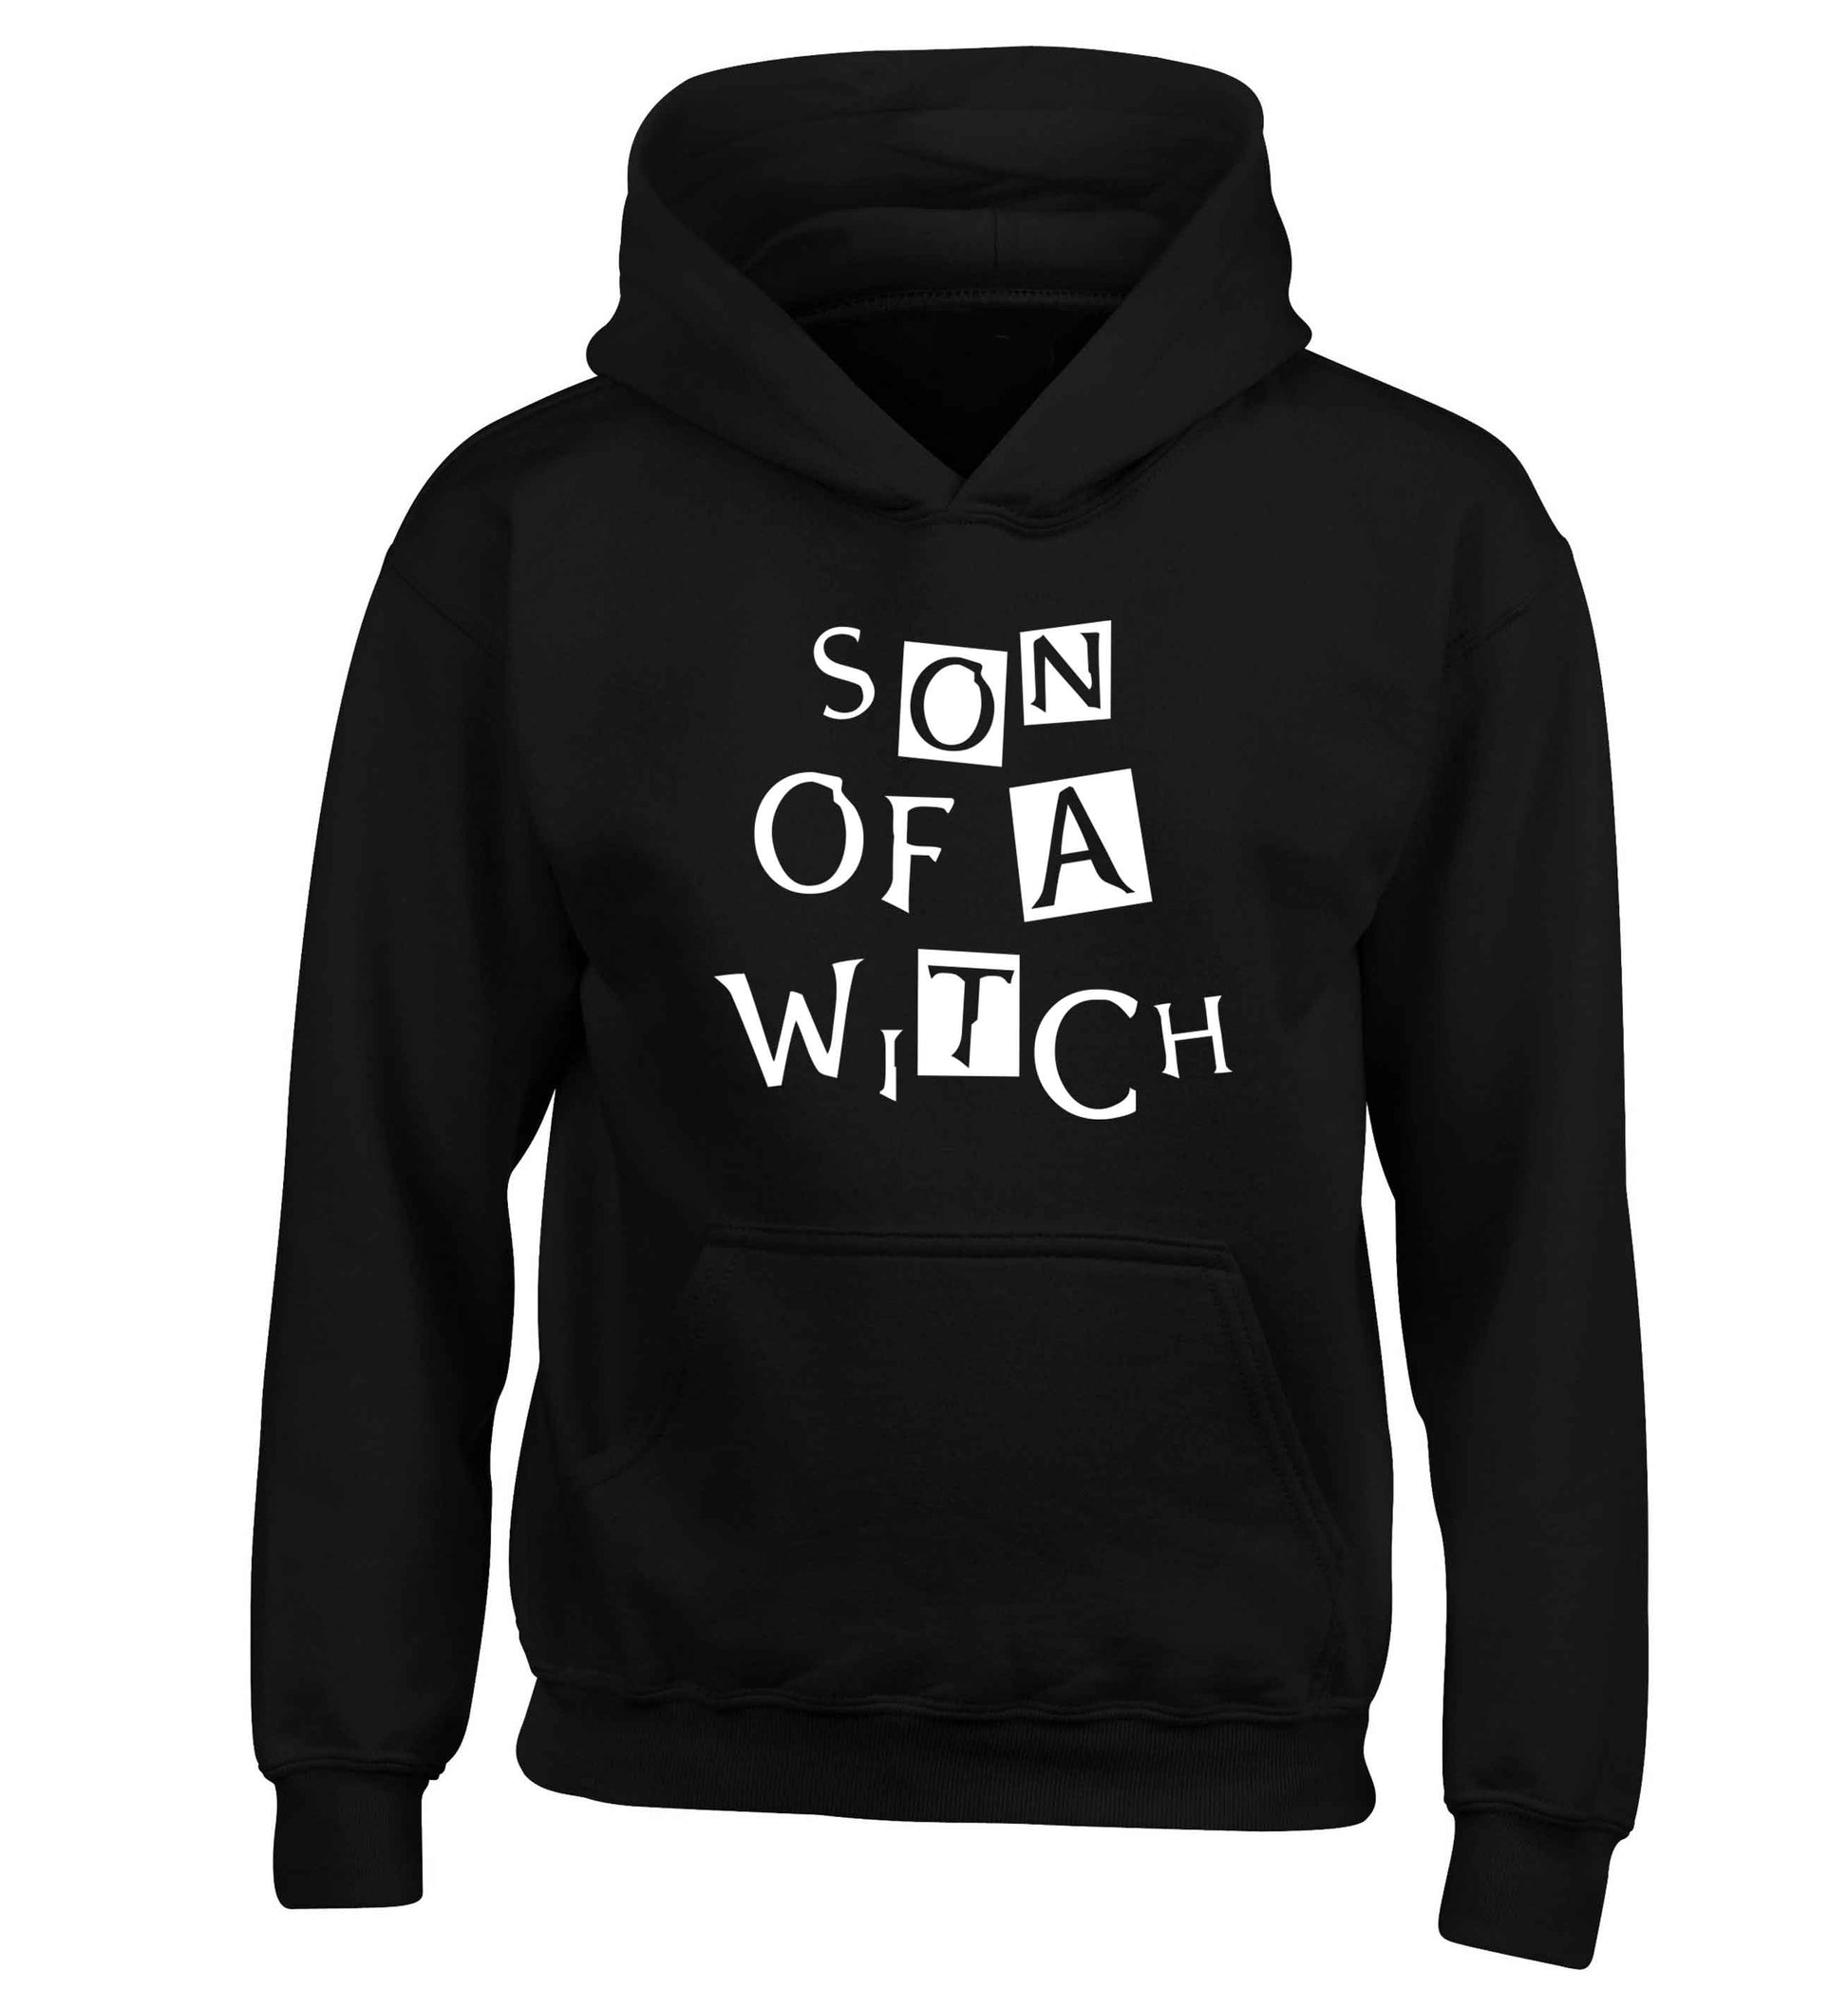 Son of a witch children's black hoodie 12-13 Years